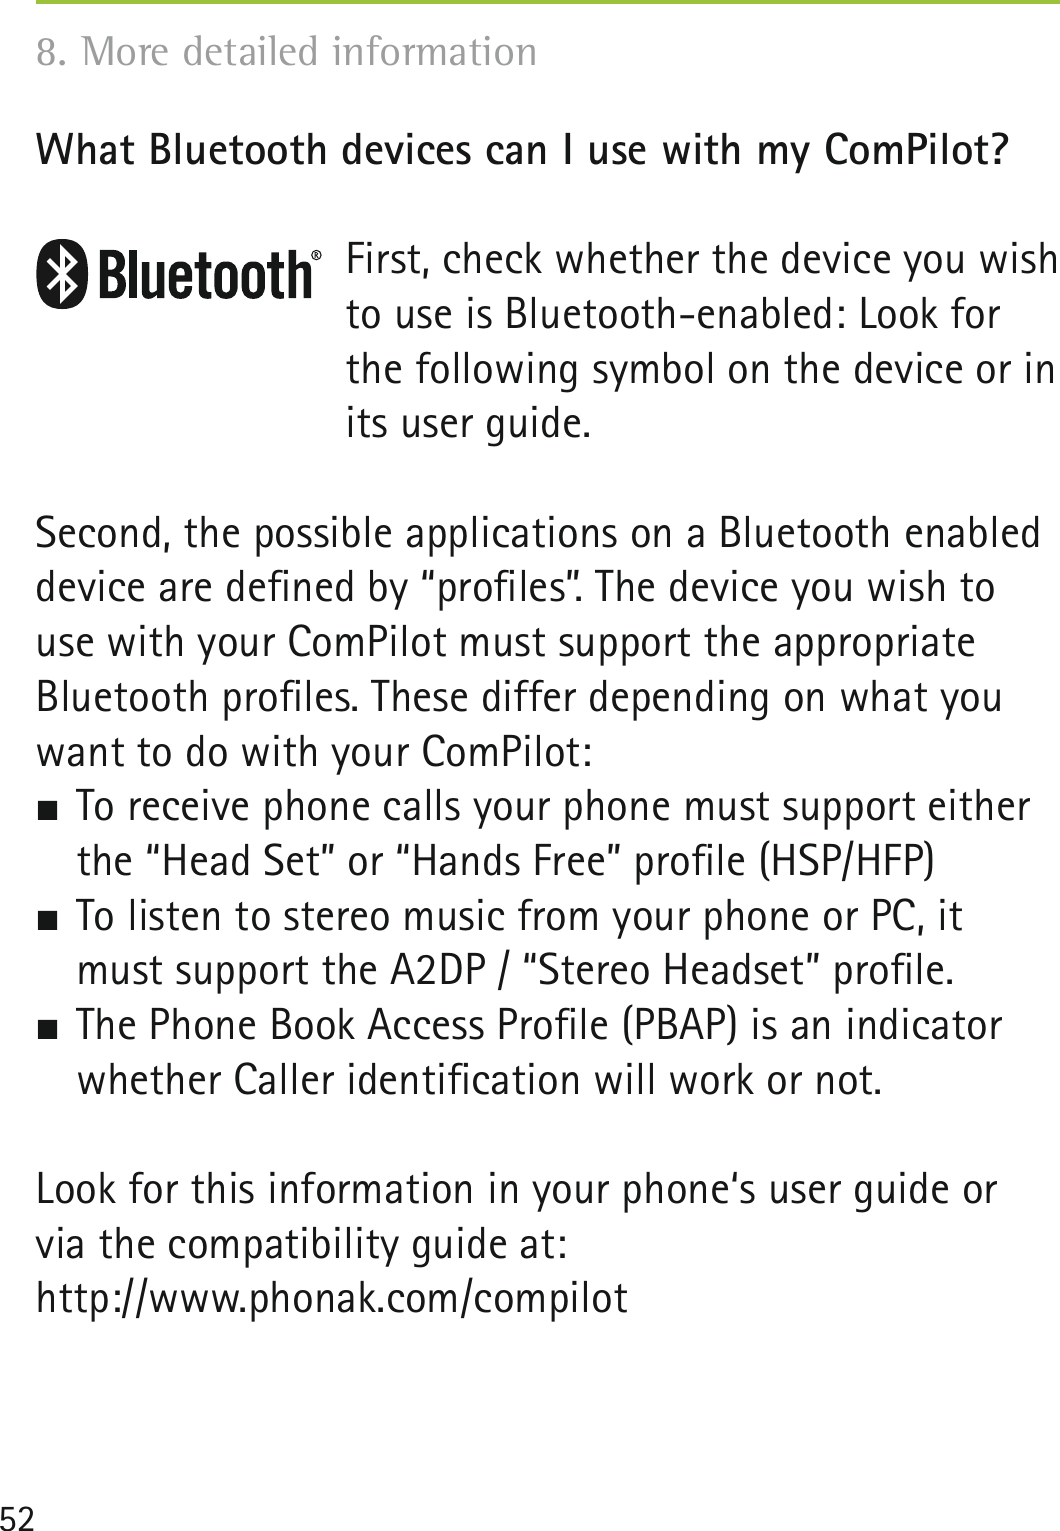 52What Bluetooth devices can I use with my ComPilot?First, check whether the device you wish to use is Bluetooth-enabled: Look for the following symbol on the device or in its user guide.Second, the possible applications on a Bluetooth enabled device are deﬁned by “proﬁles”. The device you wish to use with your ComPilot must support the appropriate Bluetooth proﬁles. These differ depending on what you want to do with your ComPilot: To receive phone calls your phone must support either the “Head Set” or “Hands Free” proﬁle (HSP/HFP) To listen to stereo music from your phone or PC, it must support the A2DP / “Stereo Headset” proﬁle. The Phone Book Access Proﬁle (PBAP) is an indicator whether Caller identiﬁcation will work or not.Look for this information in your phone‘s user guide or via the compatibility guide at:http://www.phonak.com/compilot8. More detailed information 